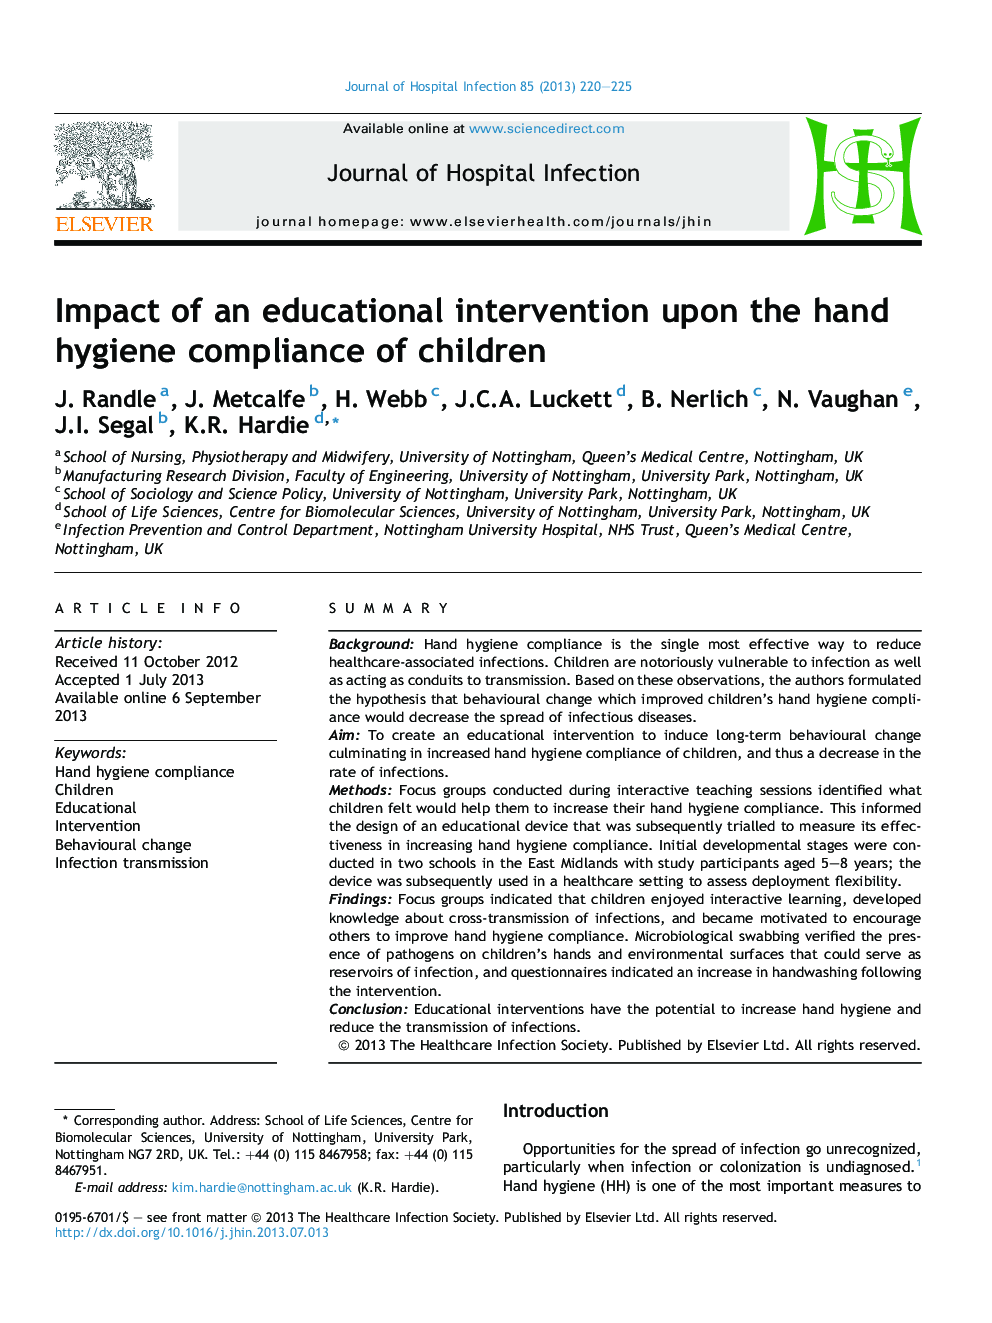 Impact of an educational intervention upon the hand hygiene compliance of children